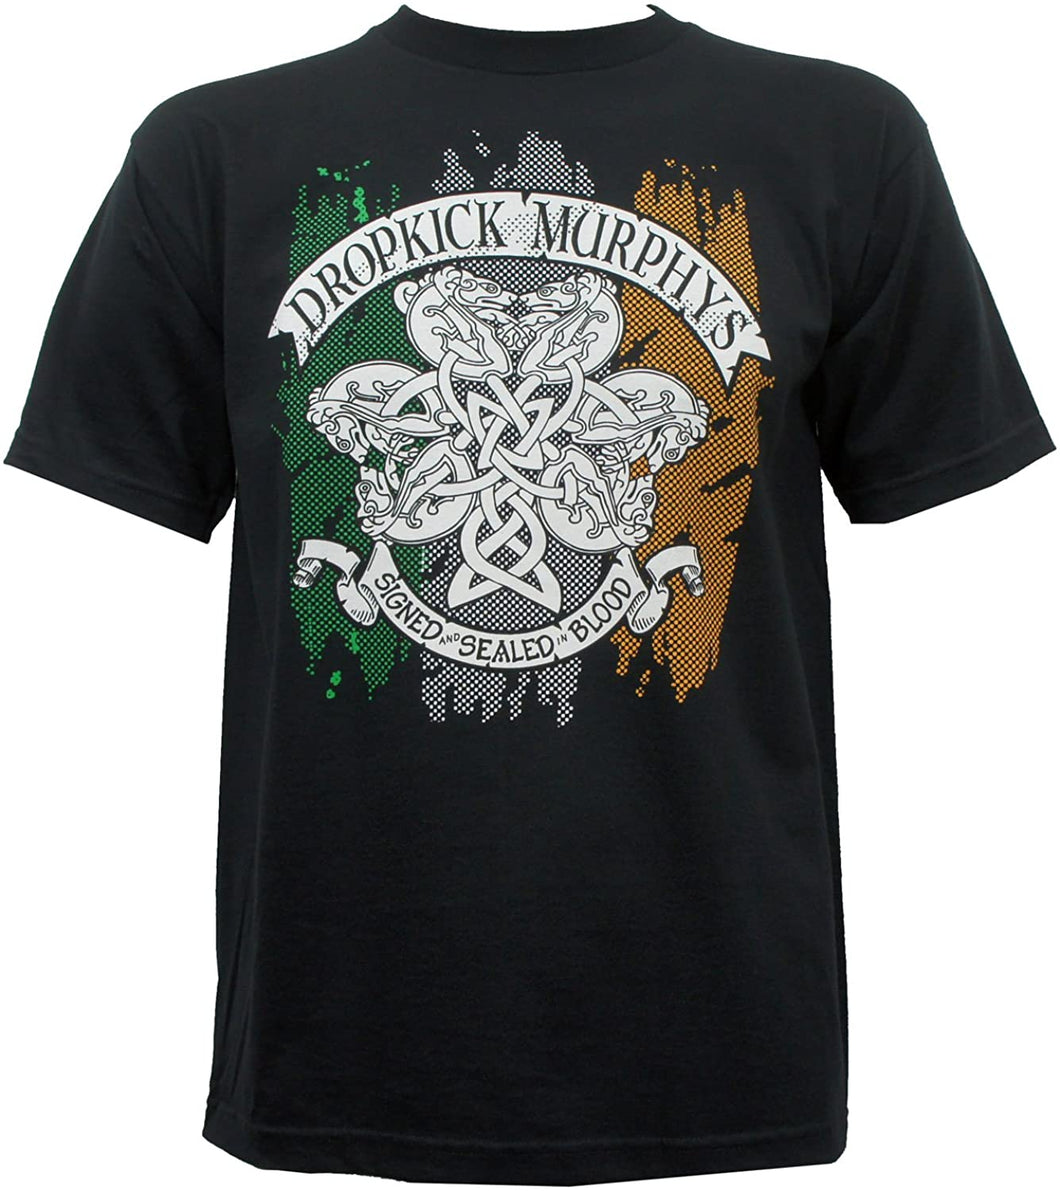 Black unisex Dropkick Murphy's shirt with logo on top, text on bottom that reads 